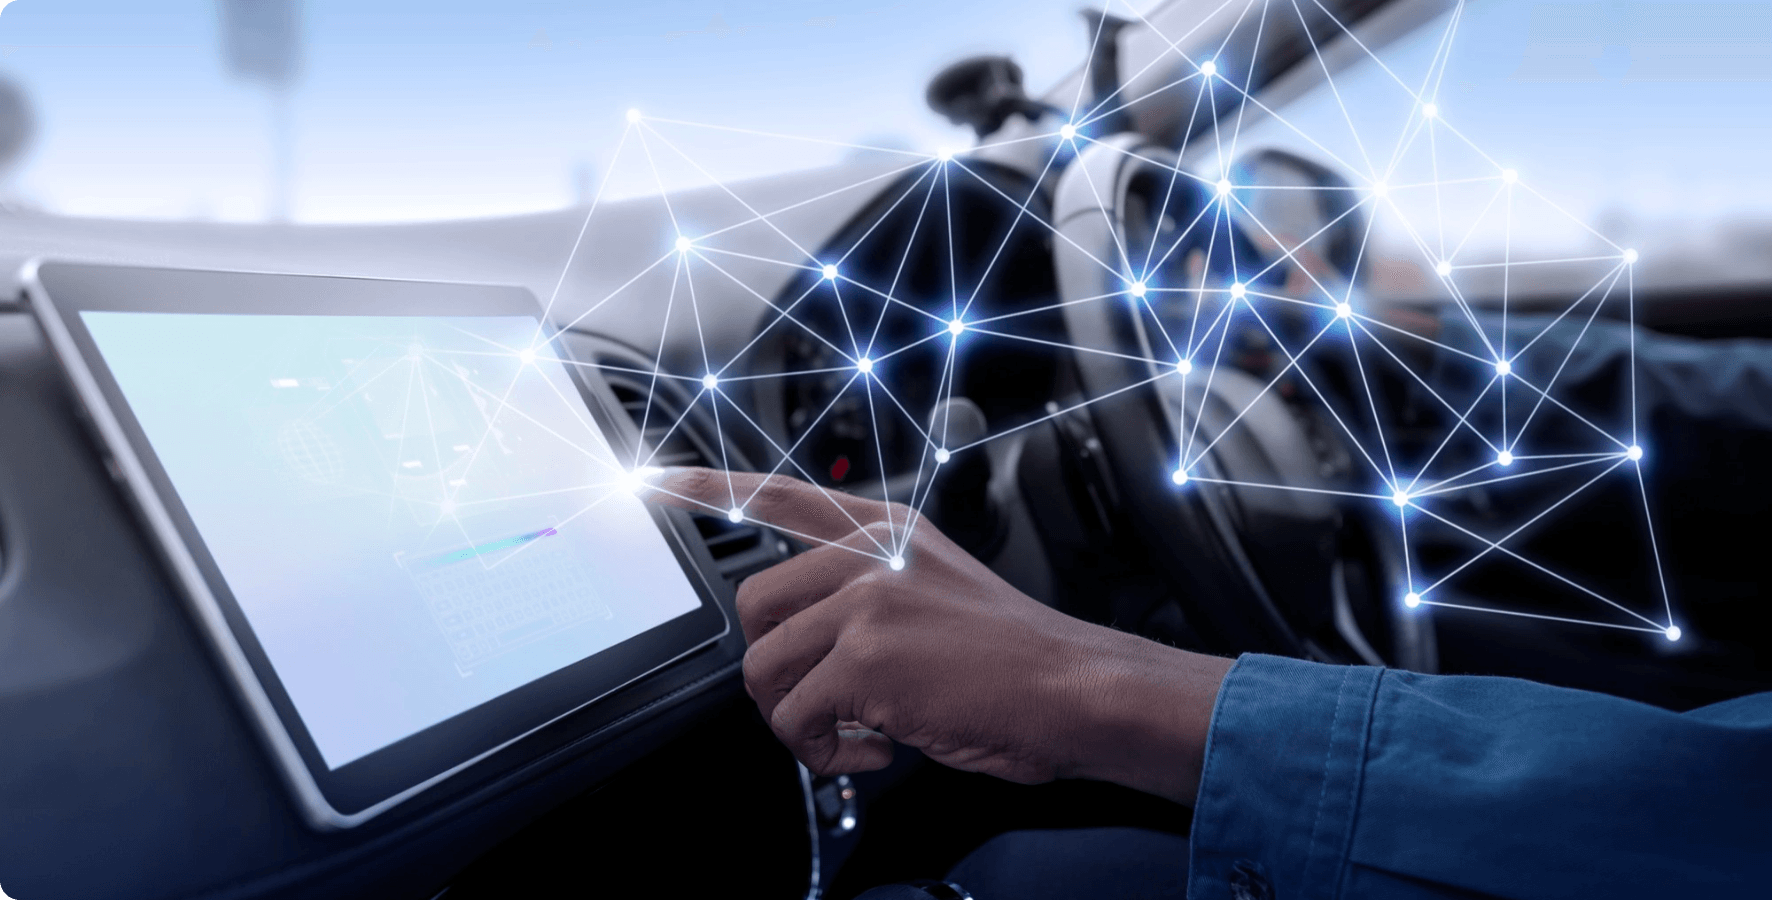 Bringing gesture control to a wider range of automobiles